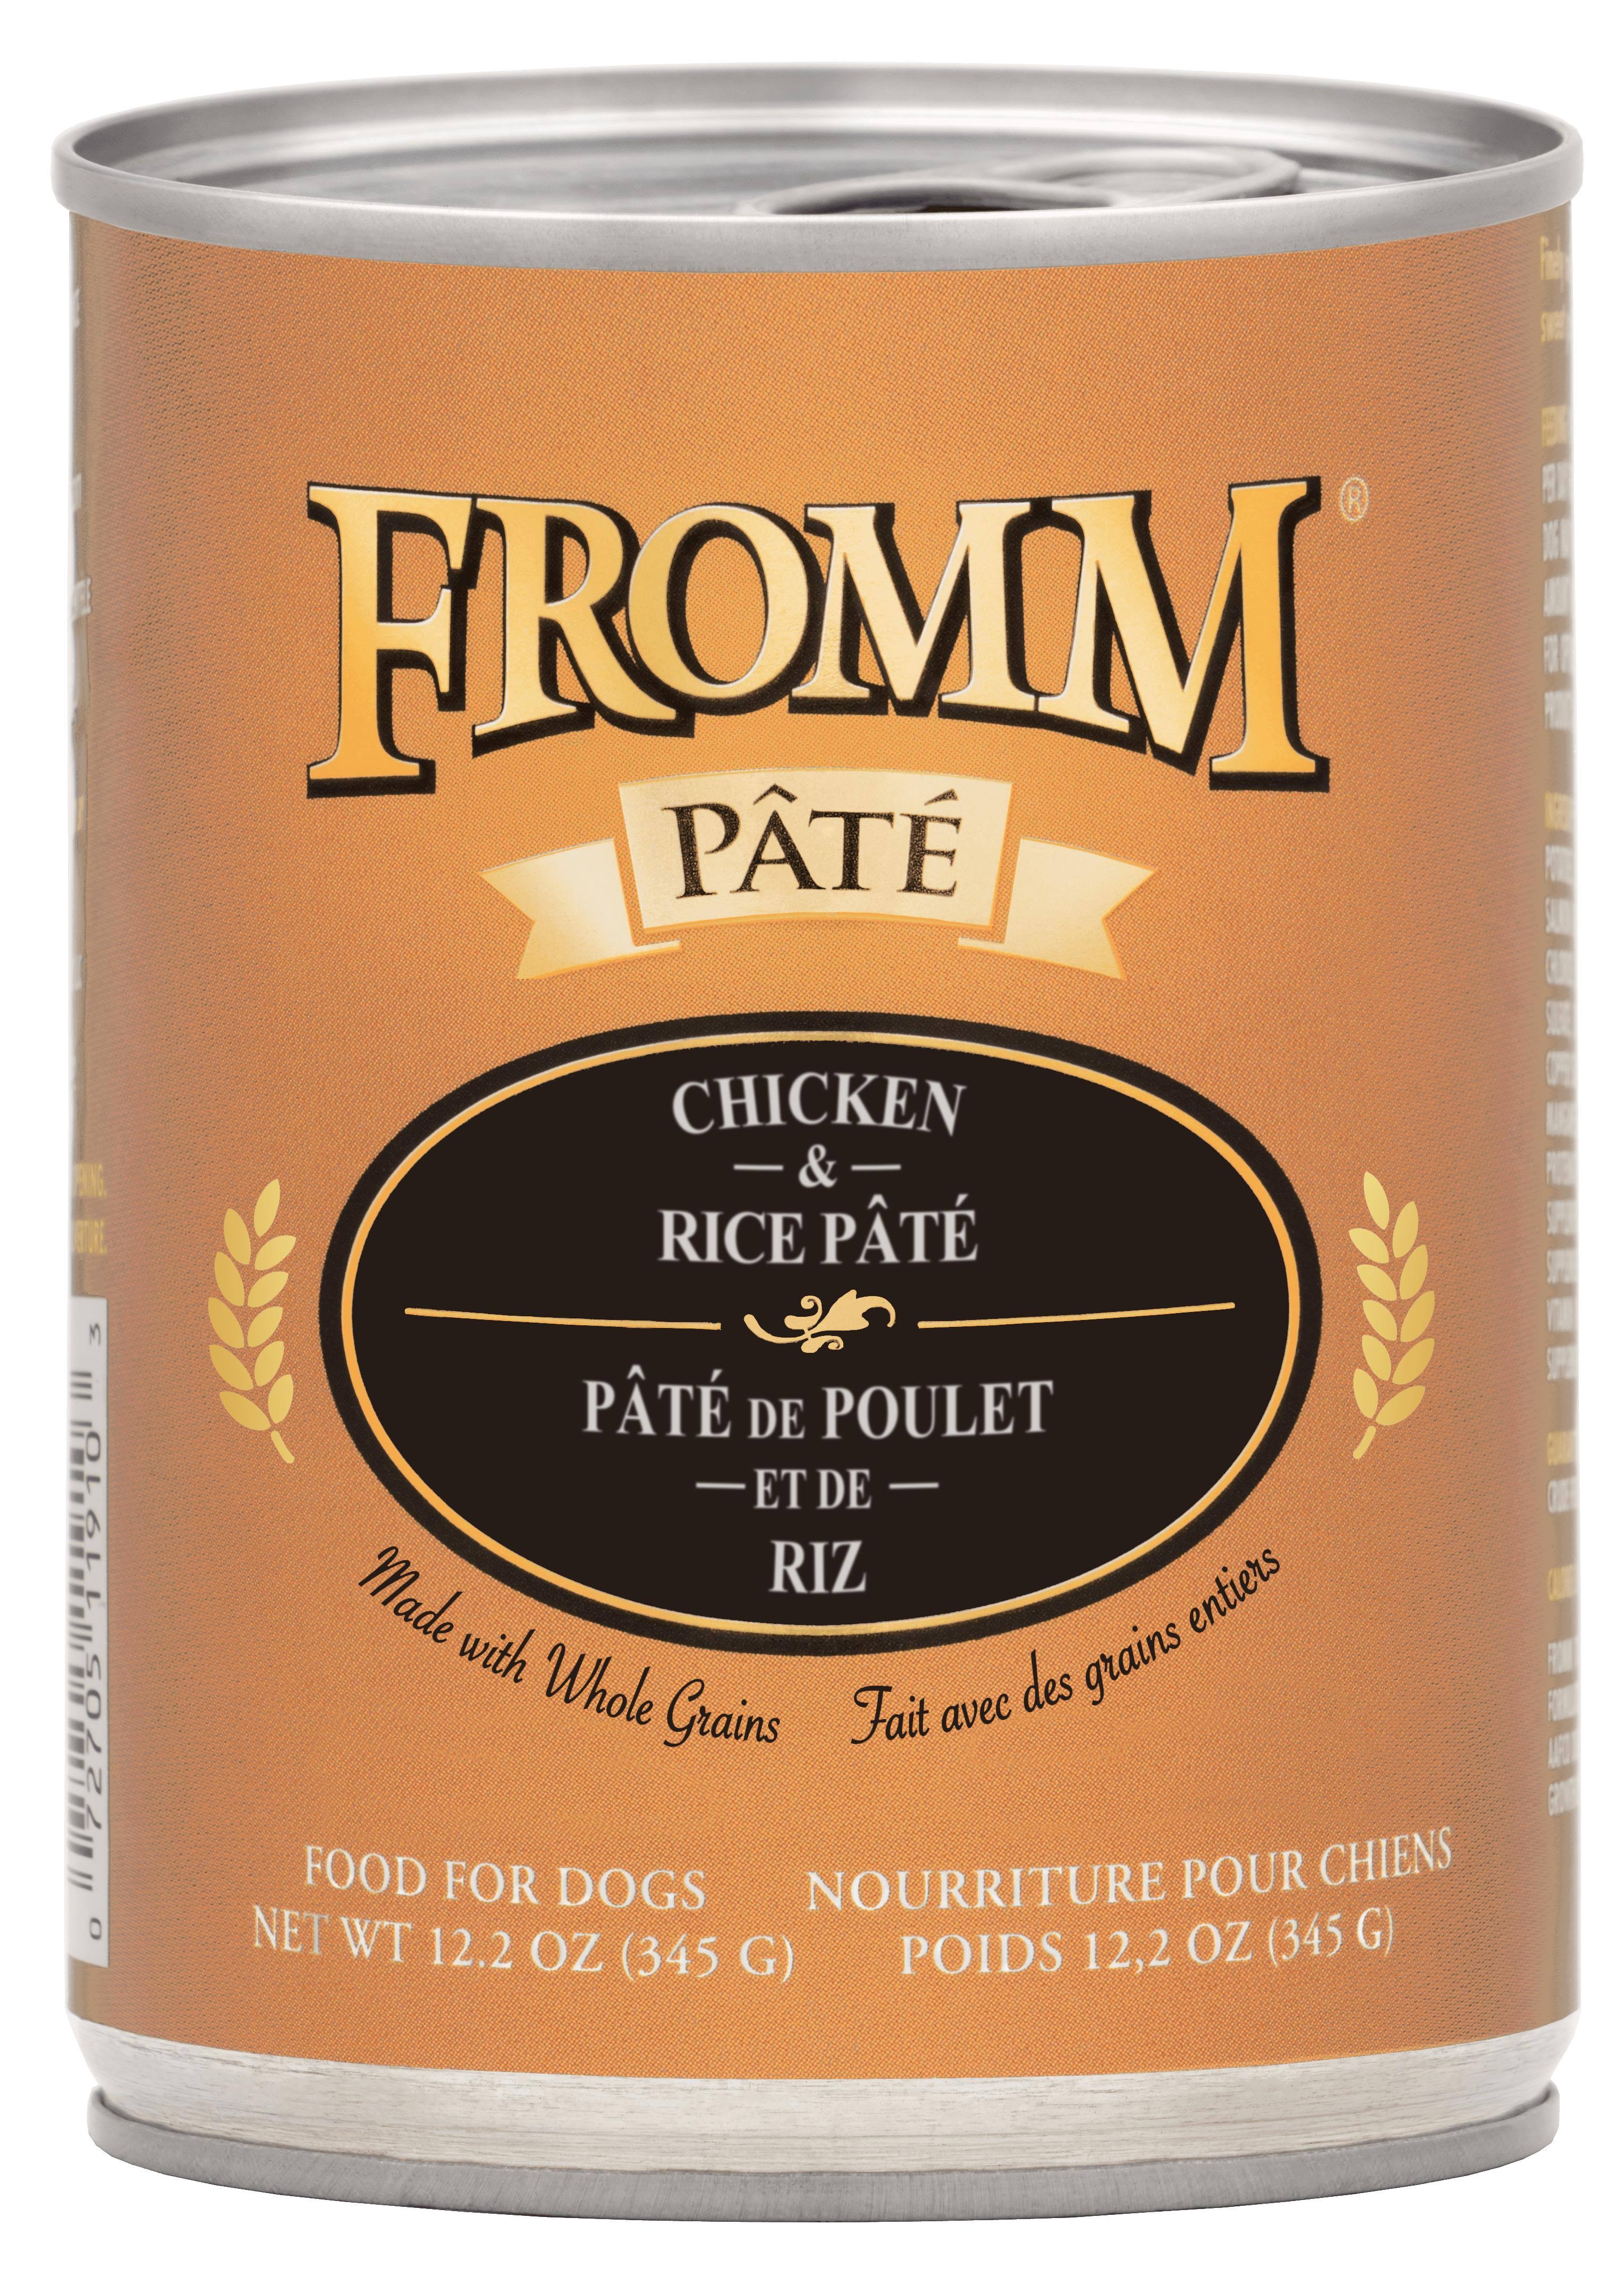 Fromm Dog Food - Chicken & Rice Pate - 12.2 oz.